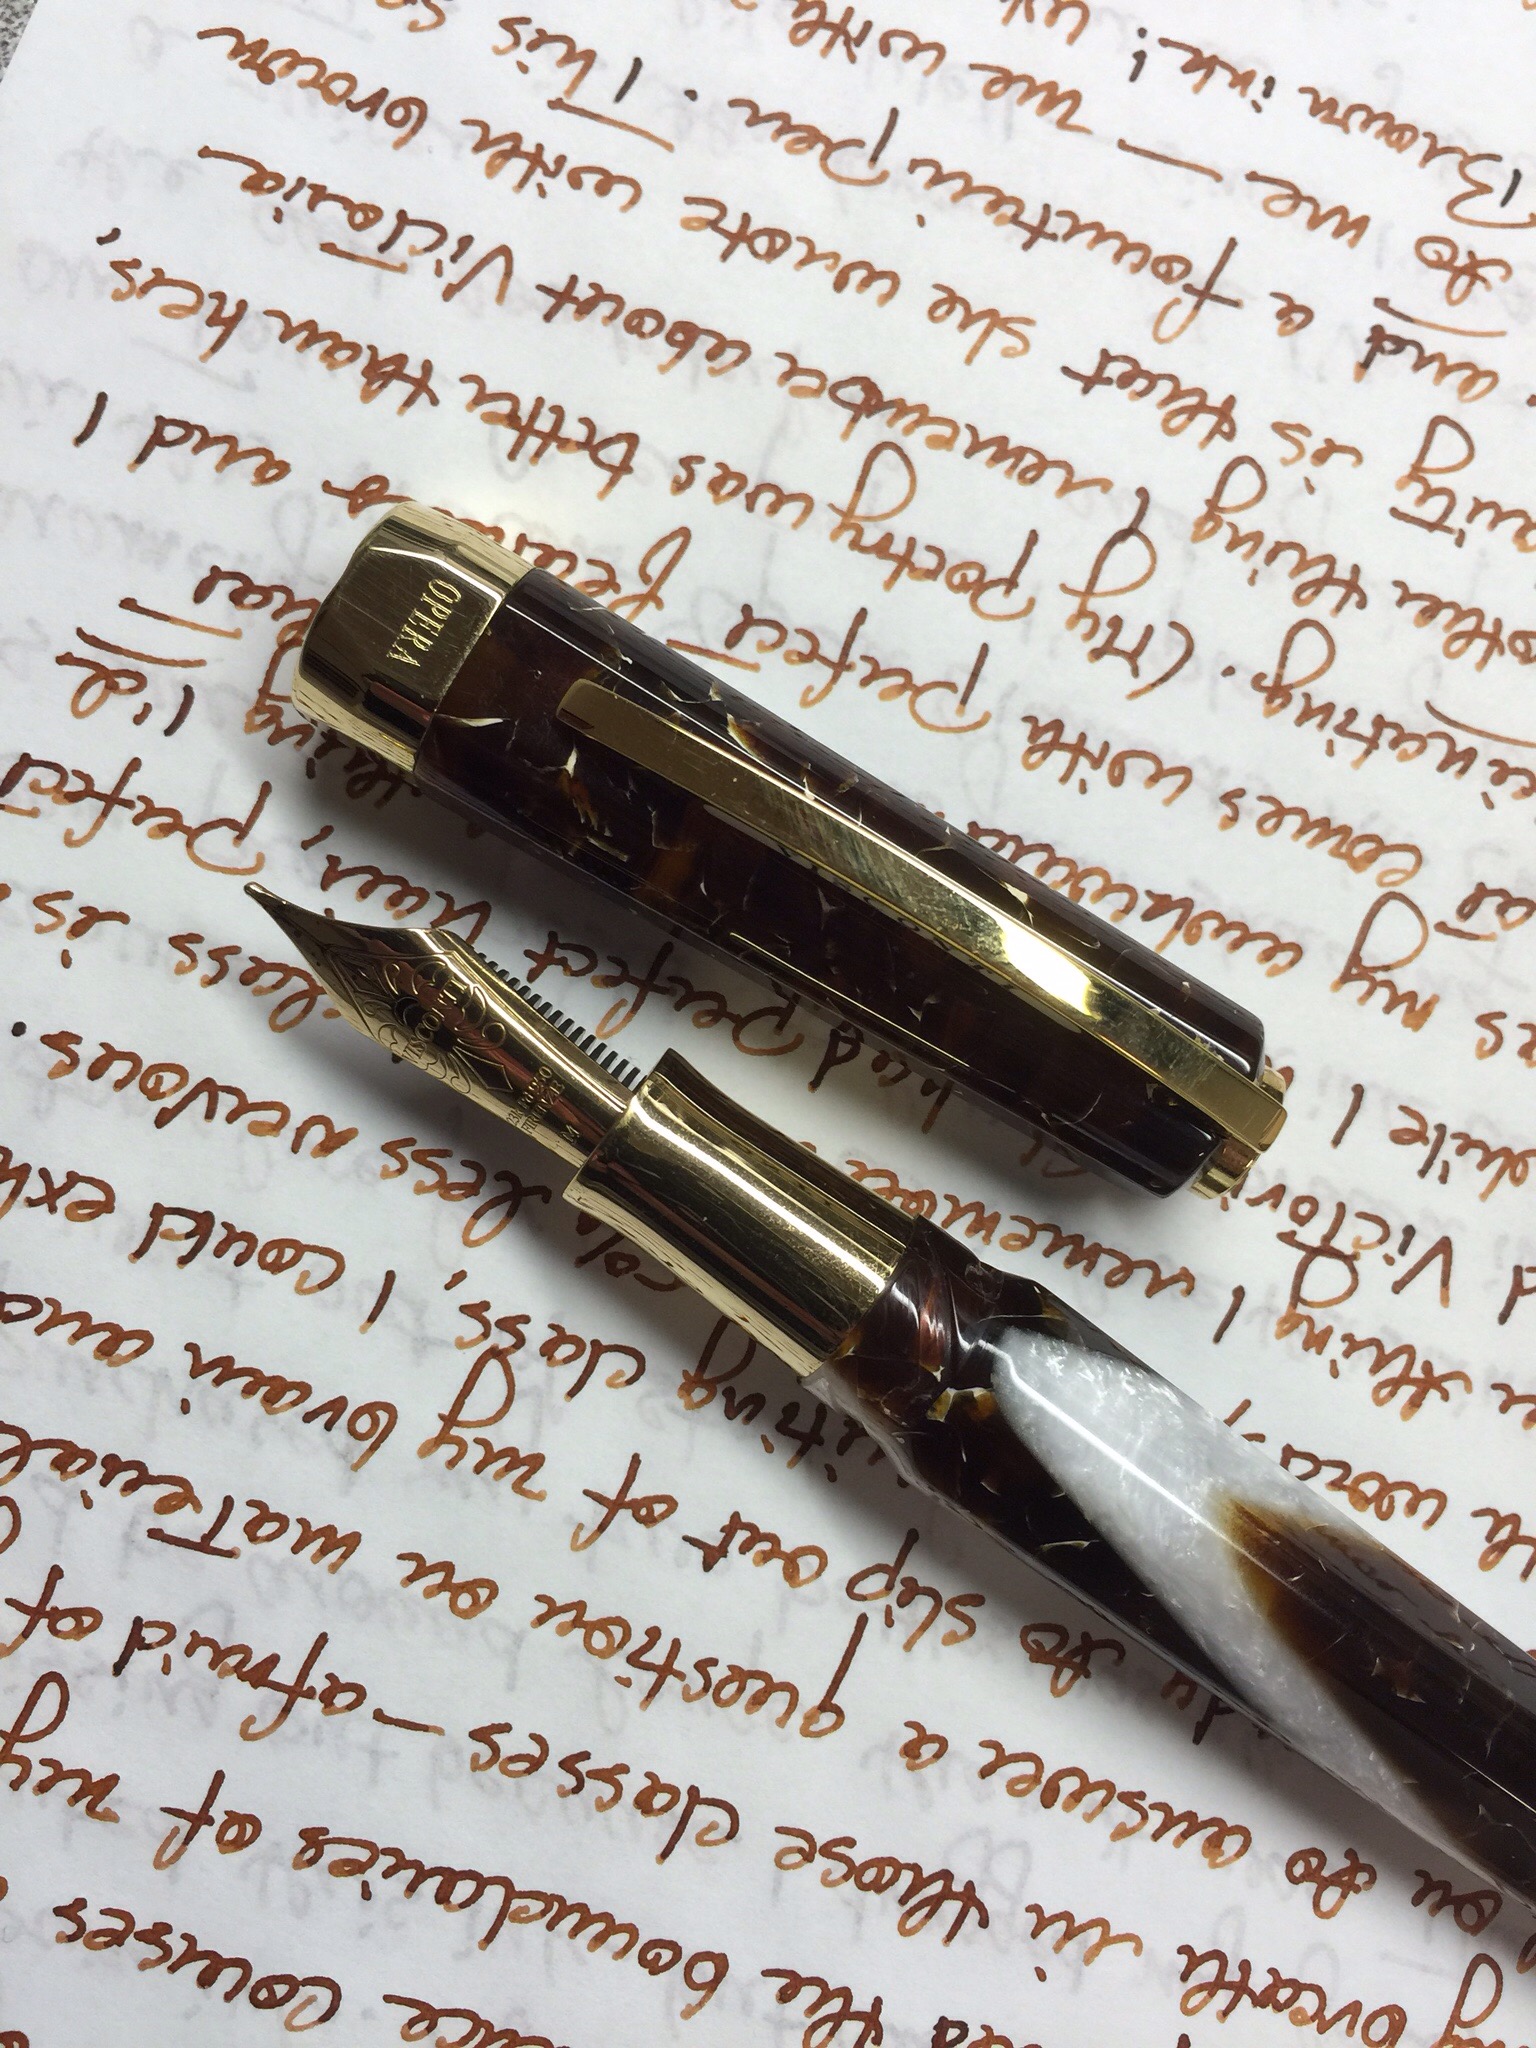 Perfect: SBRE Brown Ink | From the Pen Cup